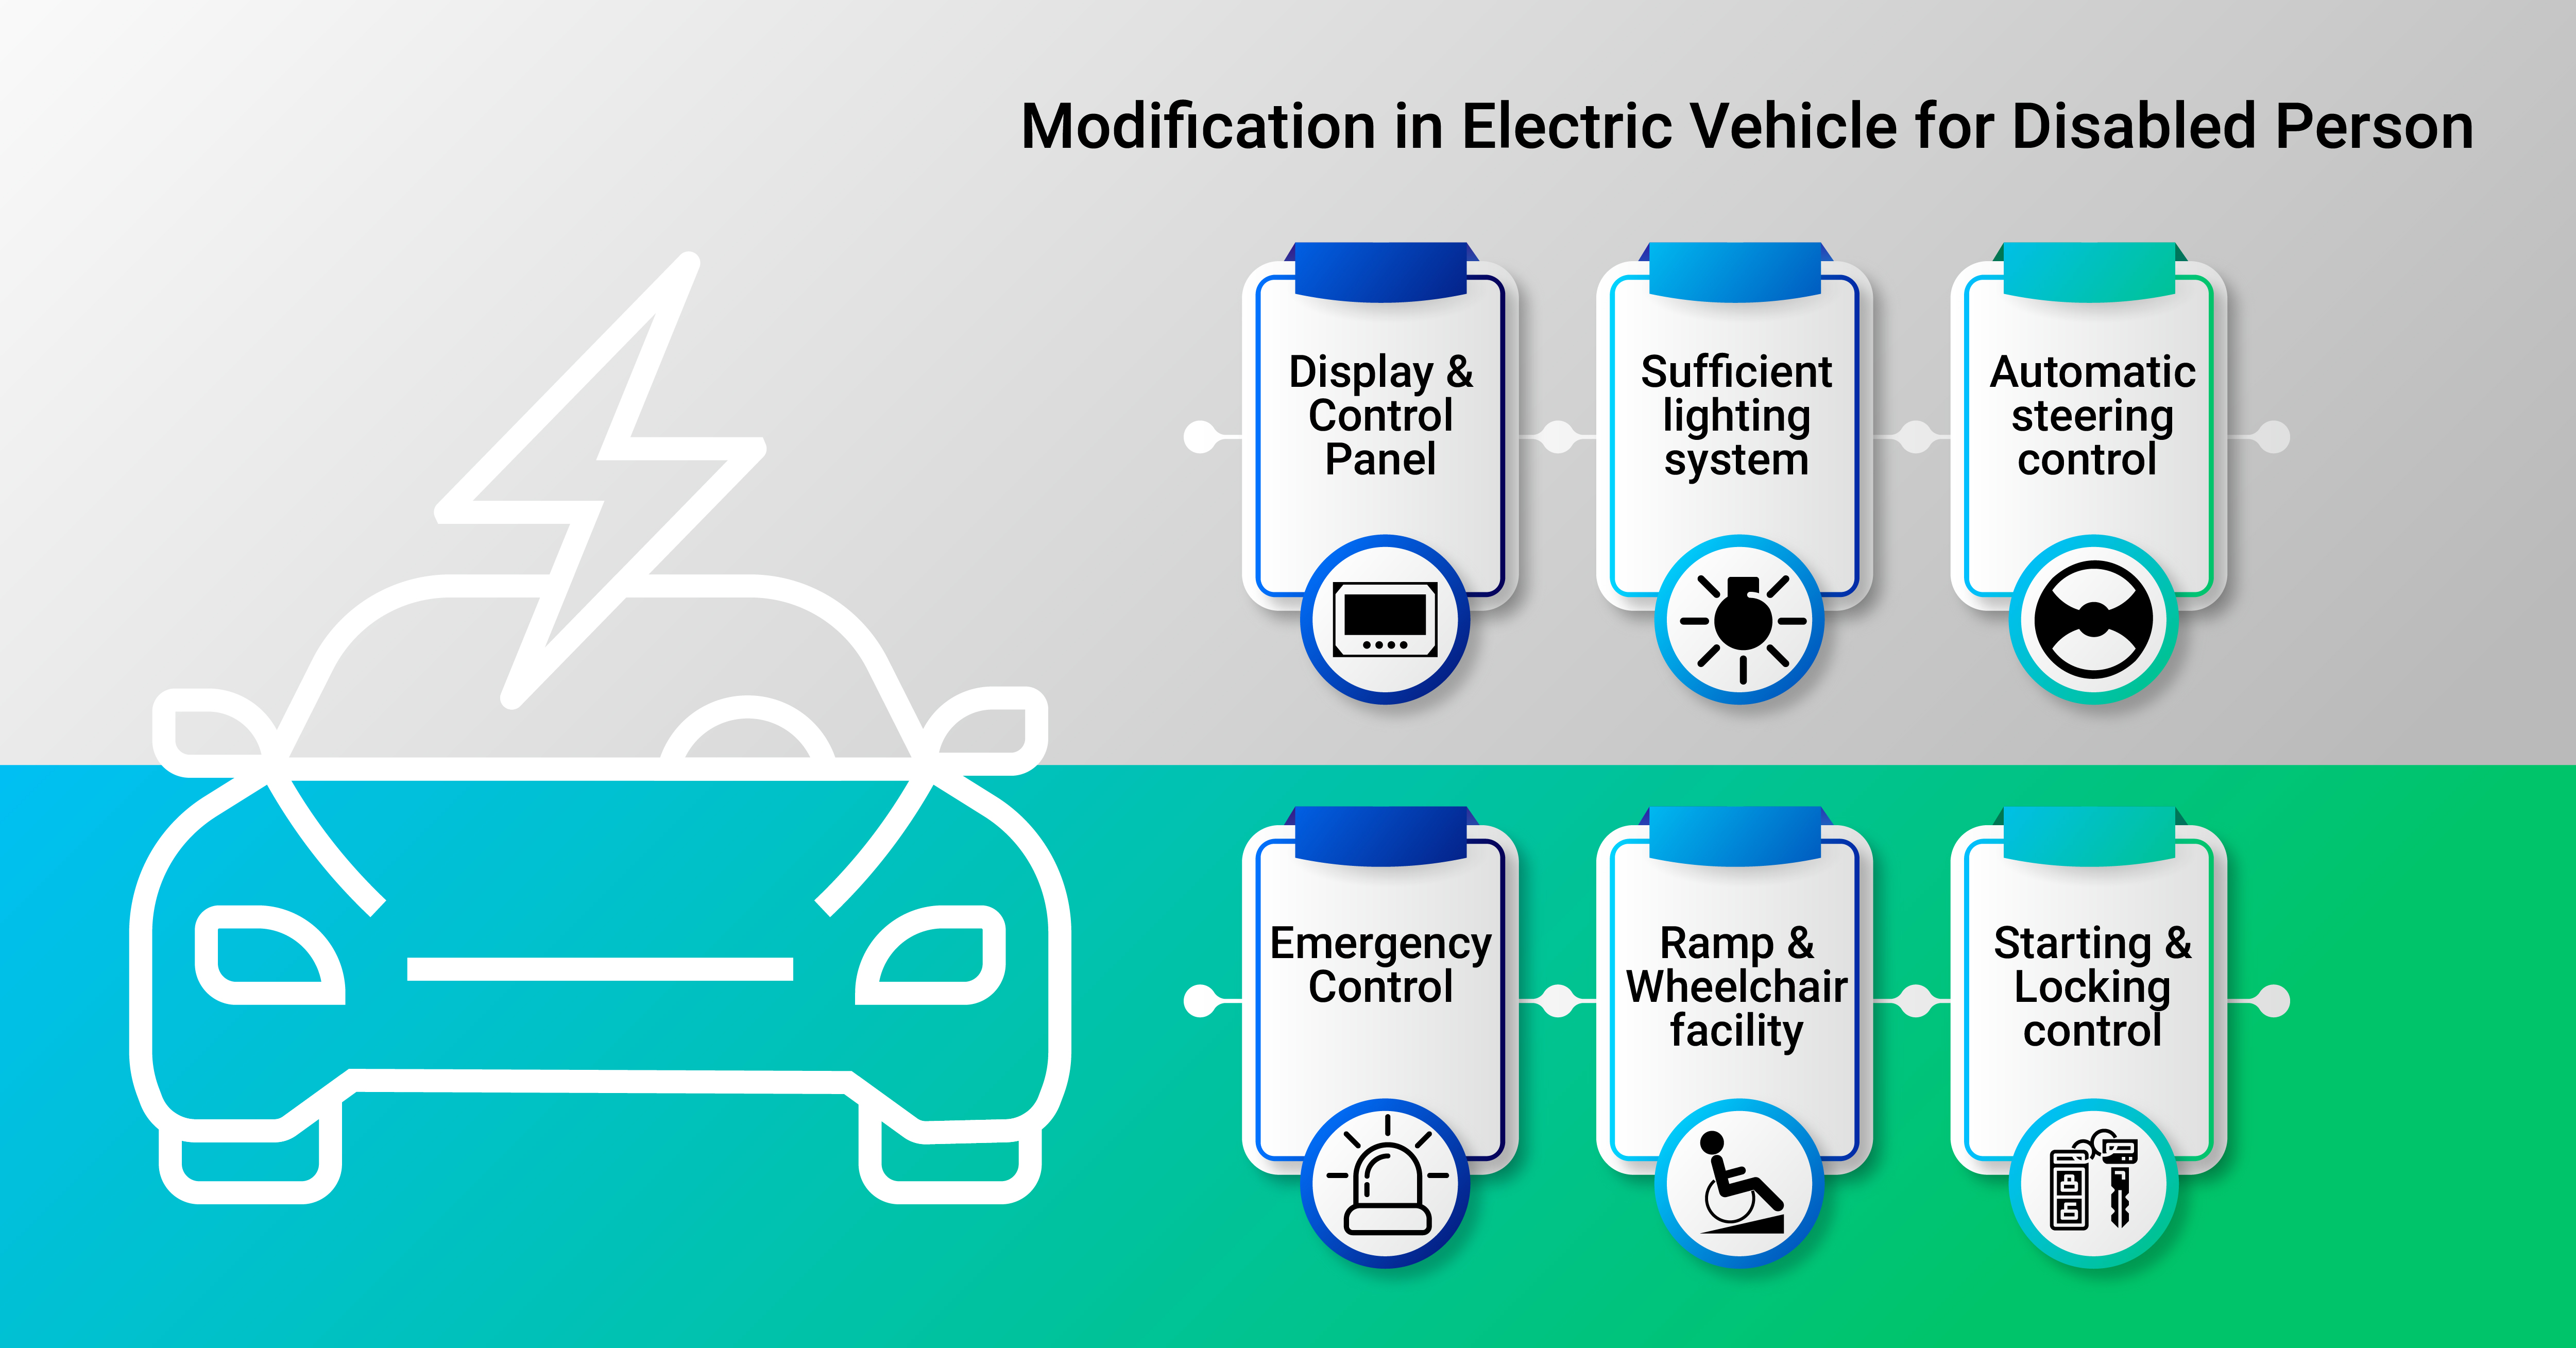 Modifications in electric vehicles for disabled persons